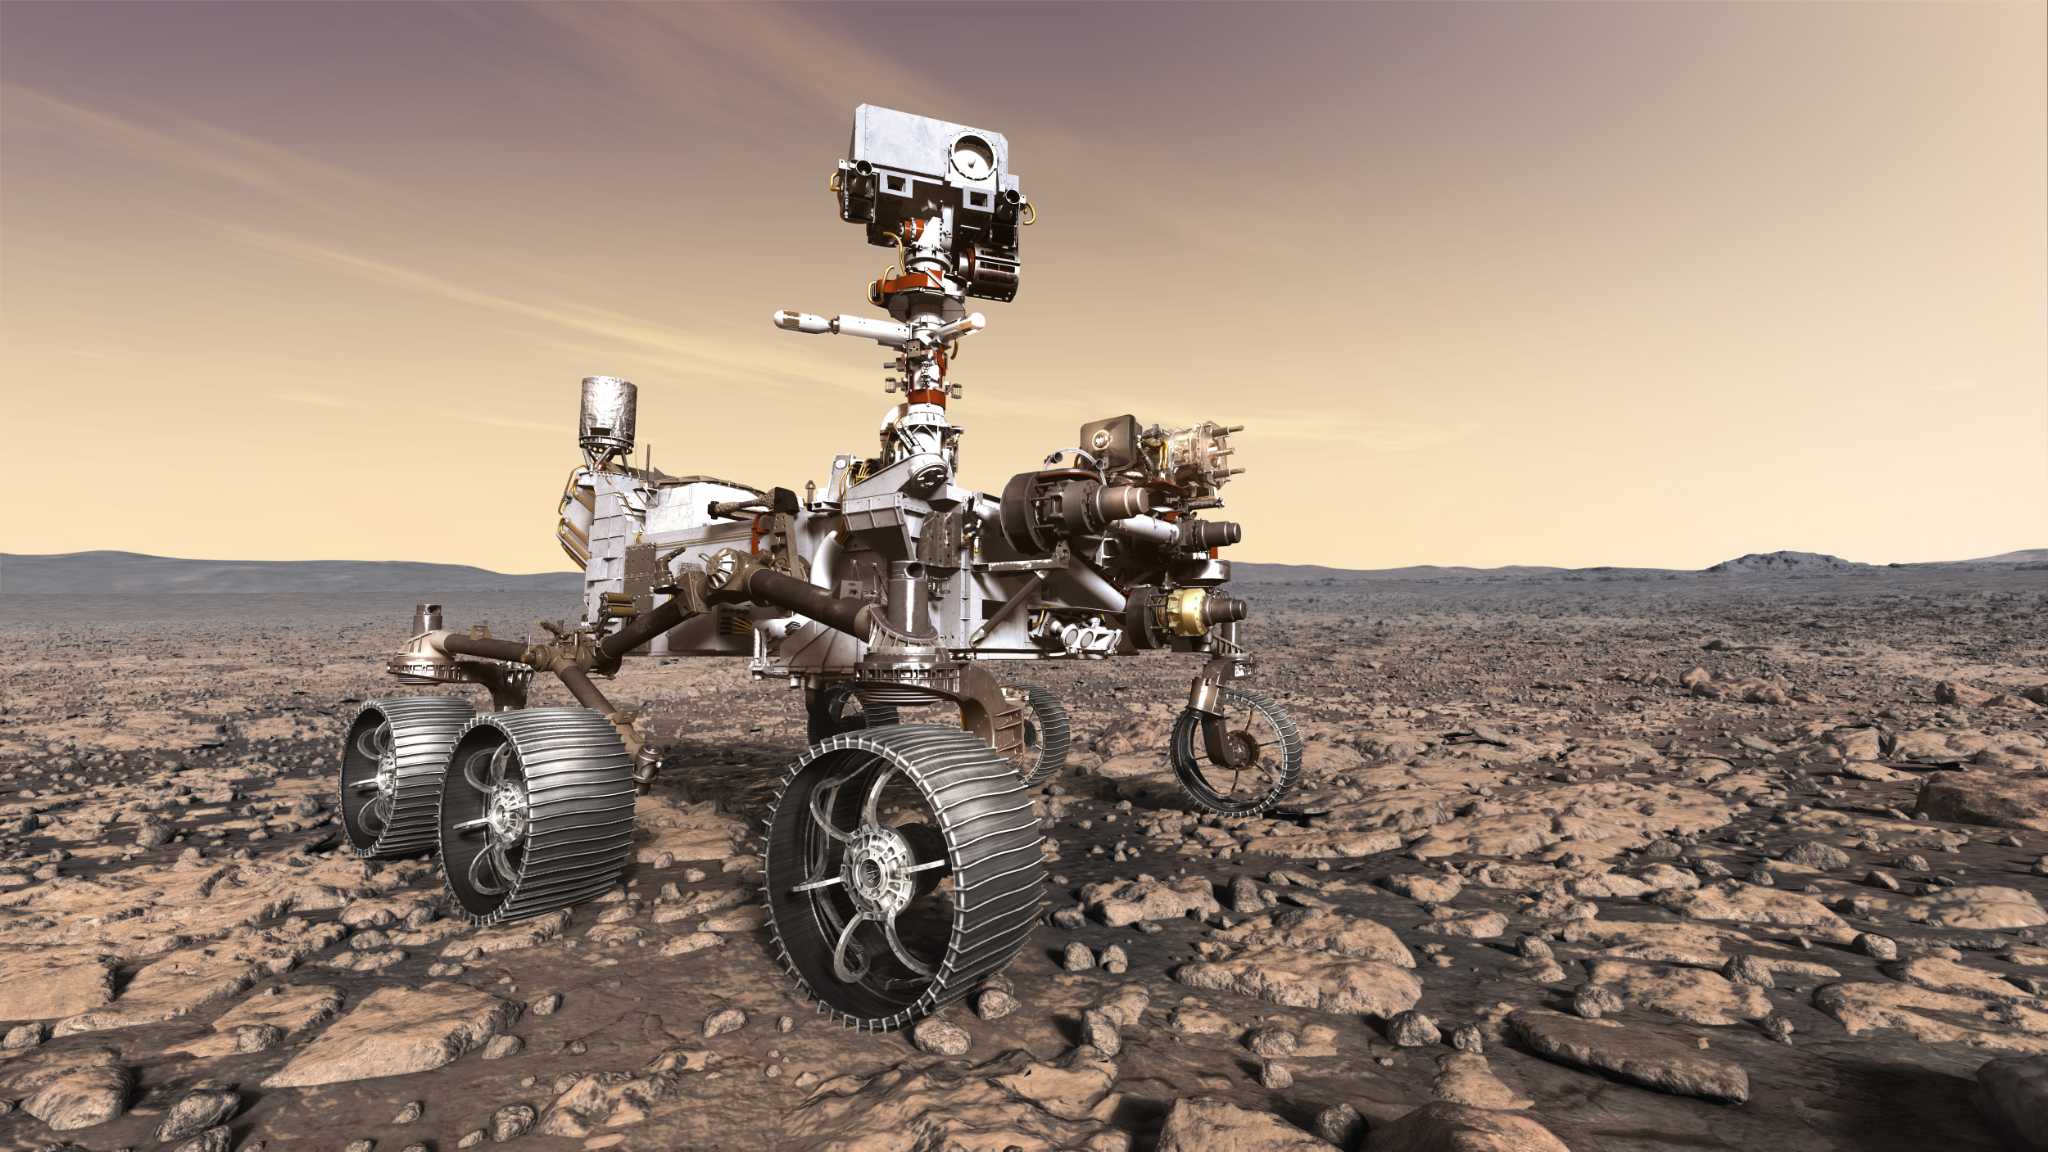 NASA's Mars 2020 rover will search Jezero Crater for signs of past life - Houston Chronicle